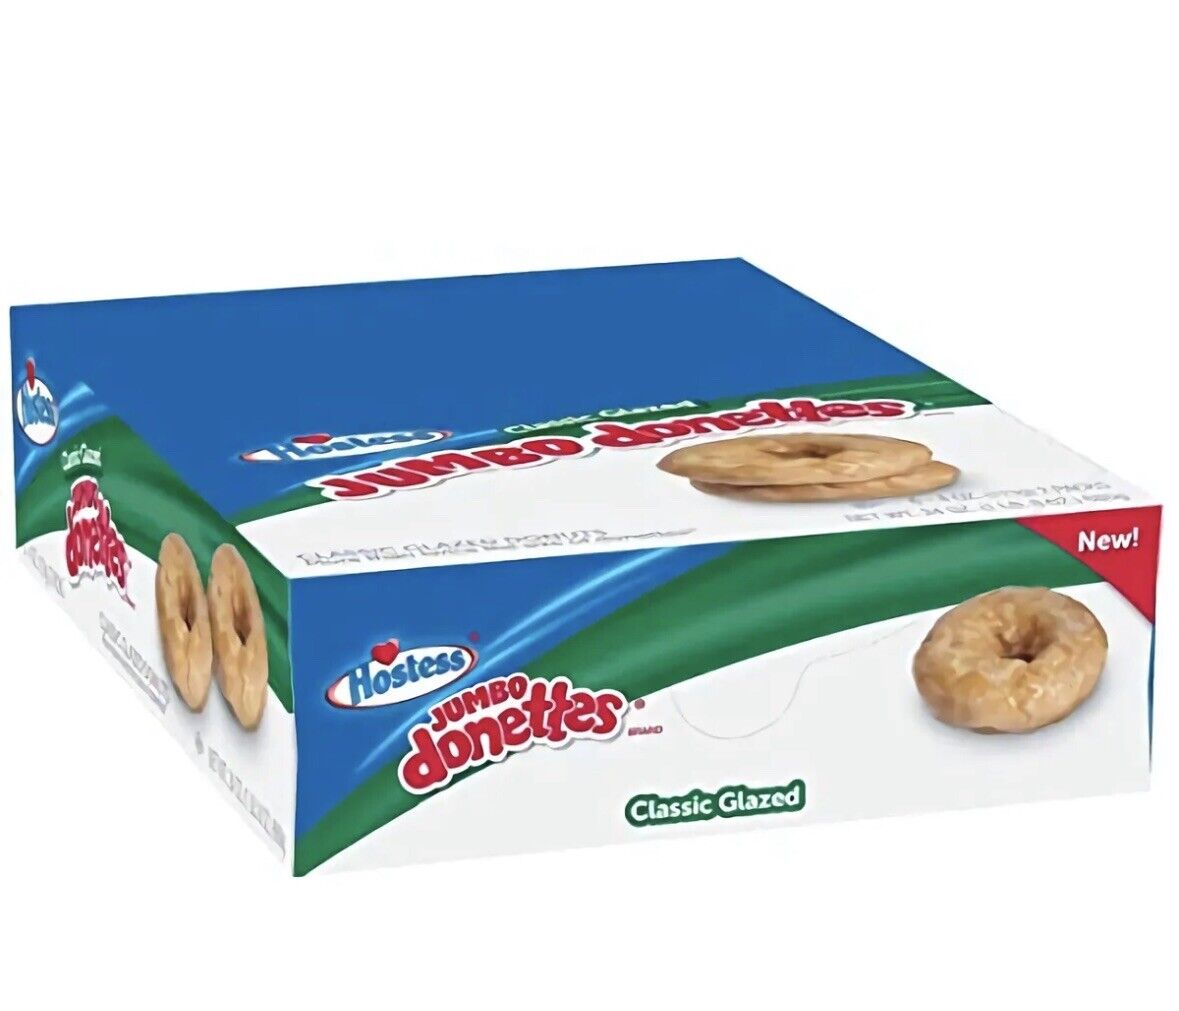 Jumbo Glazed Donettes by Hostess | 4 Ounces | 6 Count Box (12 Total Donuts)